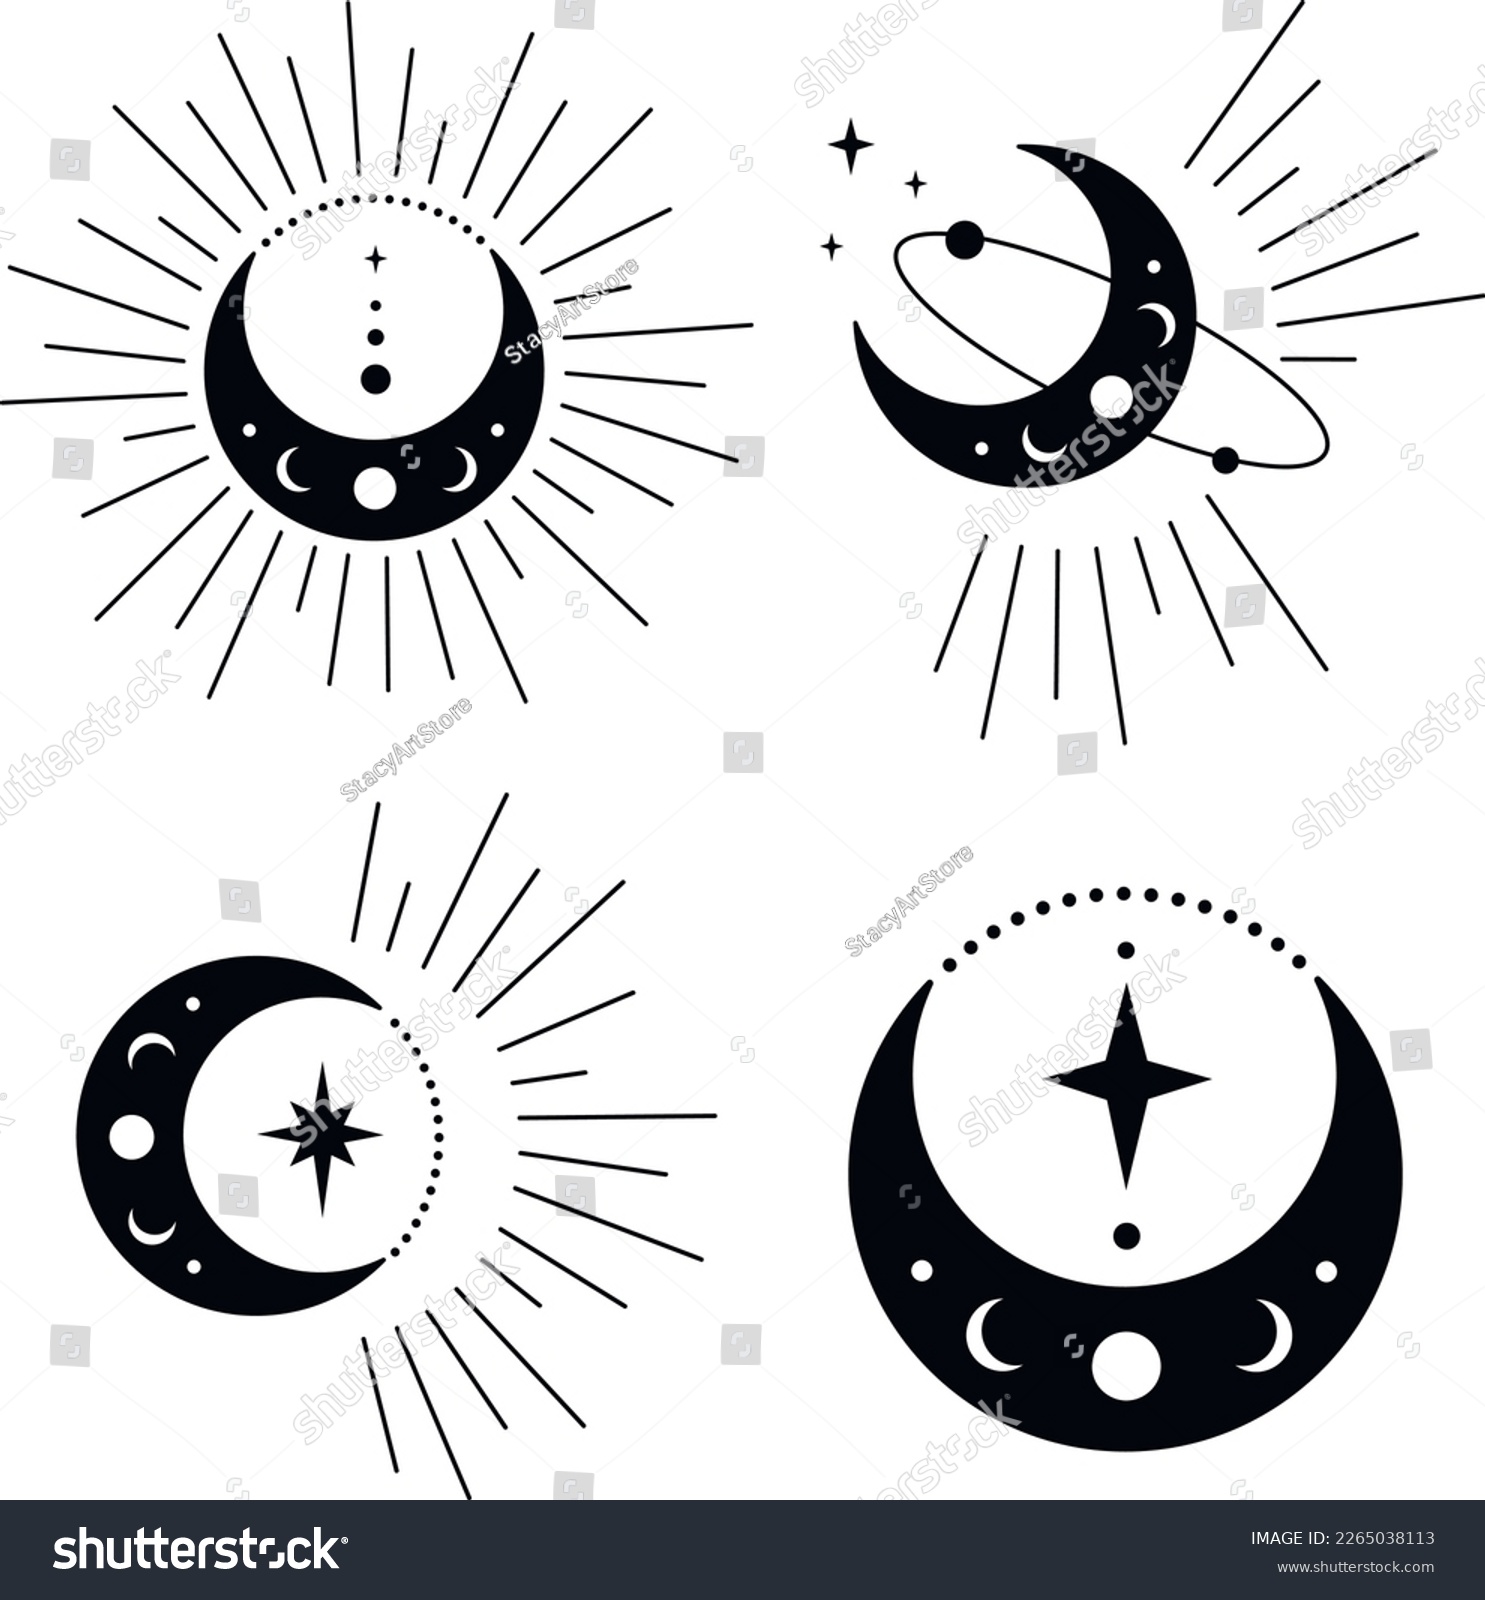 SVG of Bohemian Crescent Moon with Stars and Rays Astrology Illustration Set. Moon Phases SVG Vector Clipart. Celestial, Mystical, Esoteric designs perfect for Printing. T-shirt, Mugs, Cut Boards Cut File  svg